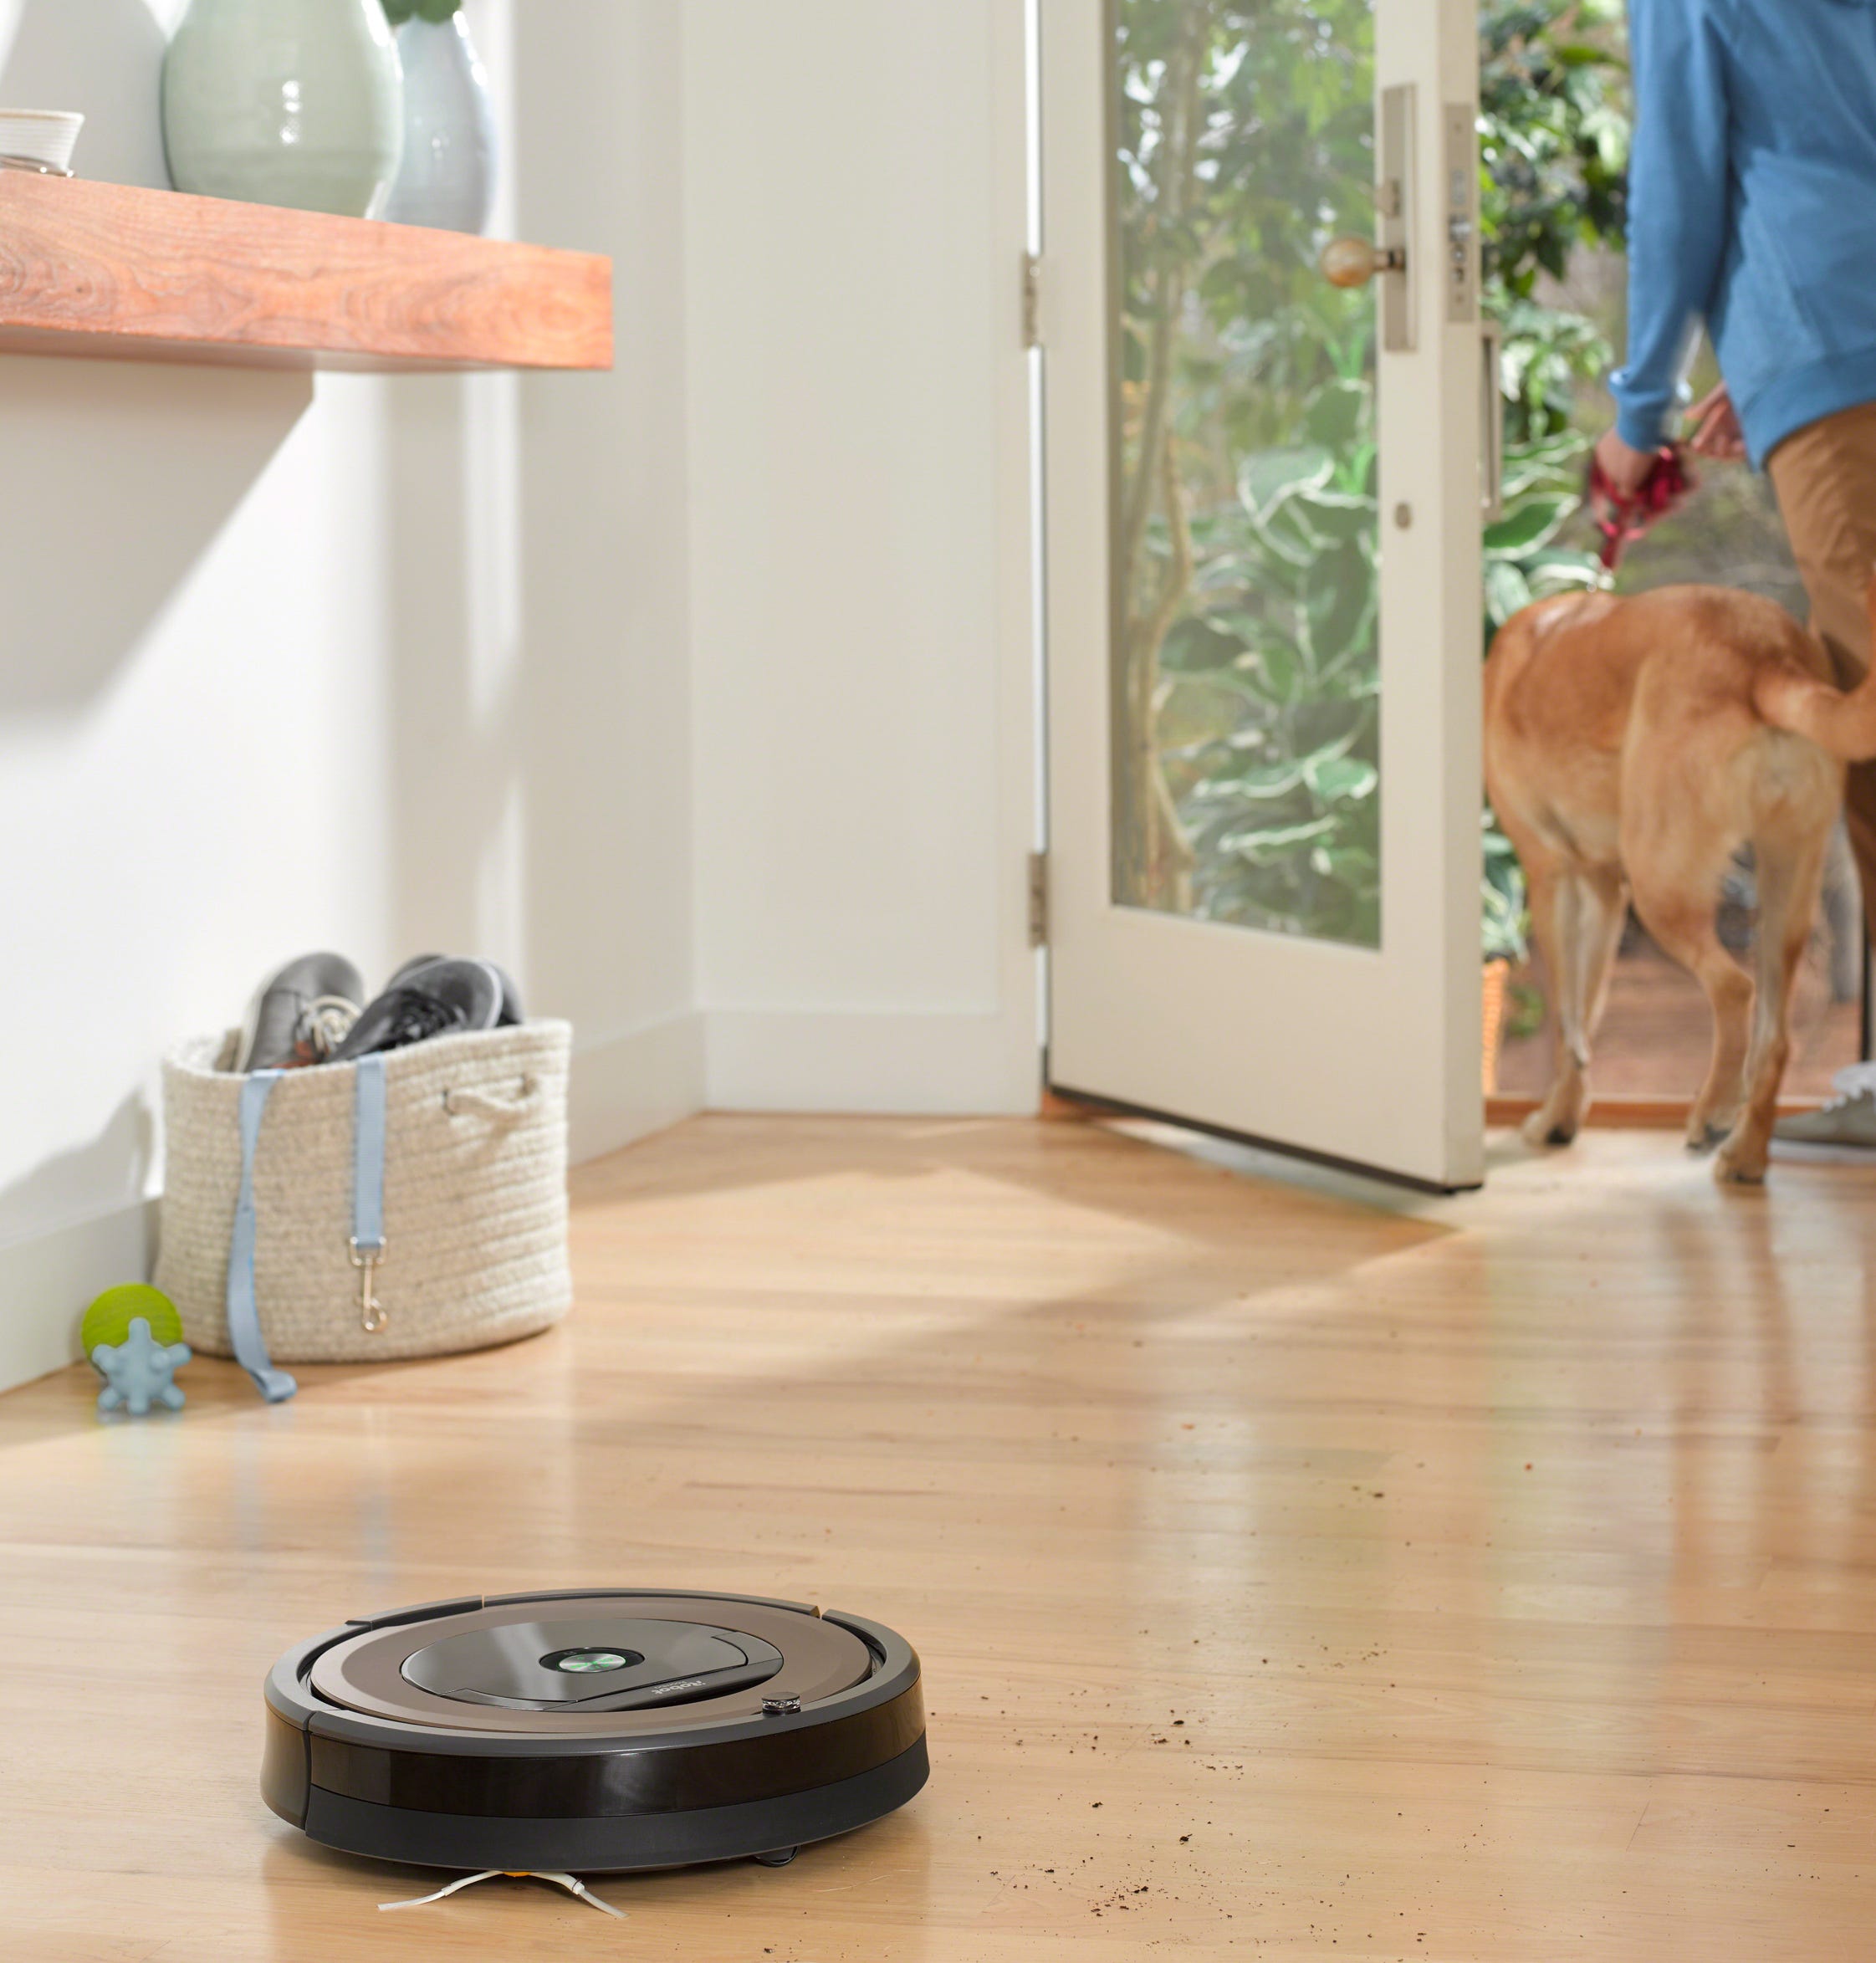 Your Roomba already maps your home. Now the CEO plans to sell that map.